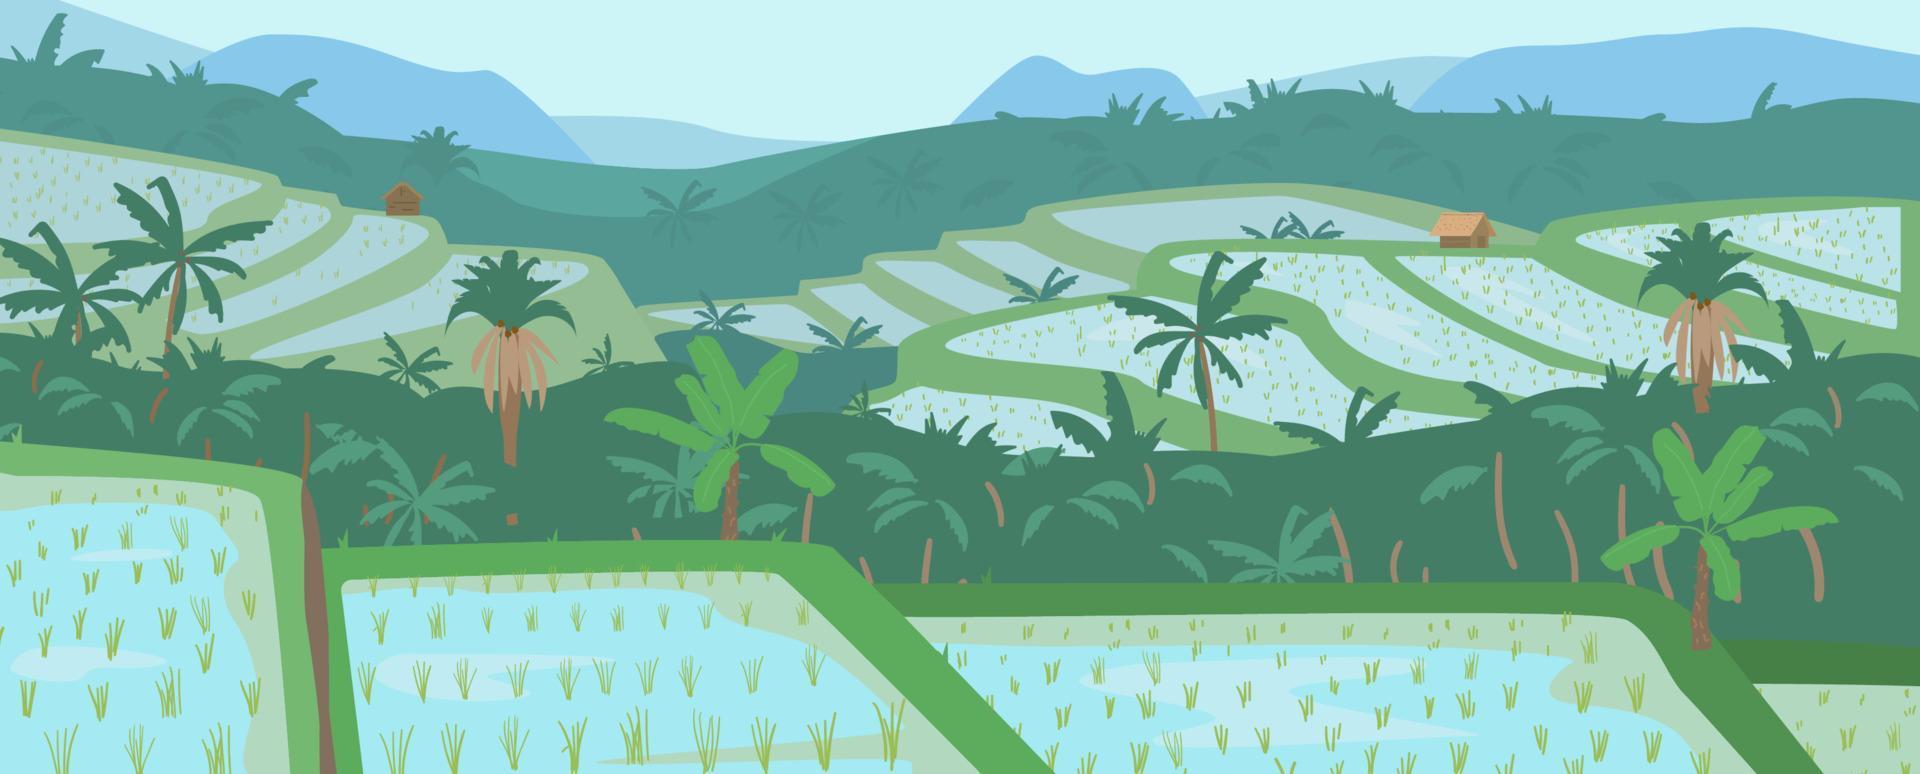 Terraced Asian Rice Fields In Mountains Landscape. Traditional Agriculture. Vector Illustration.